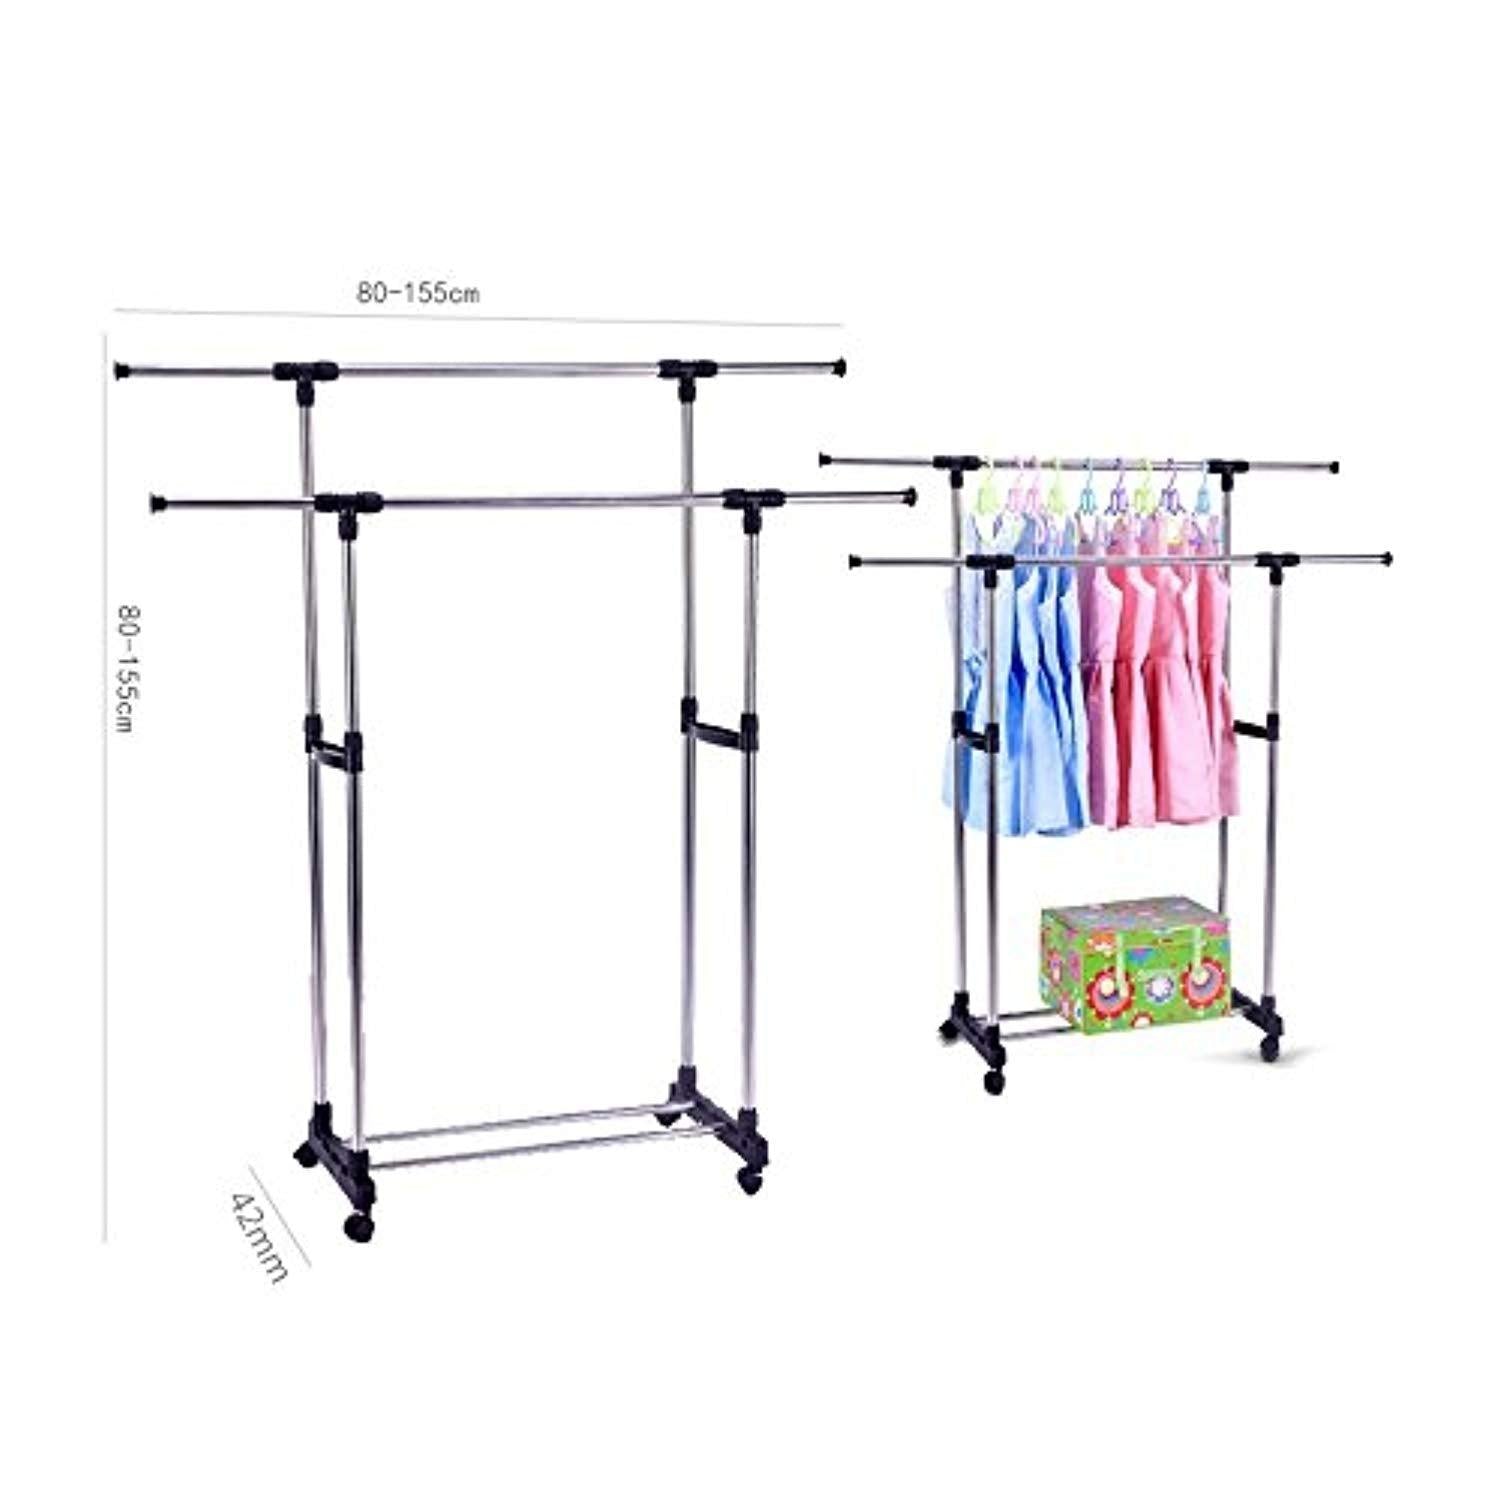 Bosonshop Double Rods Adjustable Clothes Rack Rolling Garment Rack with Shoe storage and Bottom Wheels